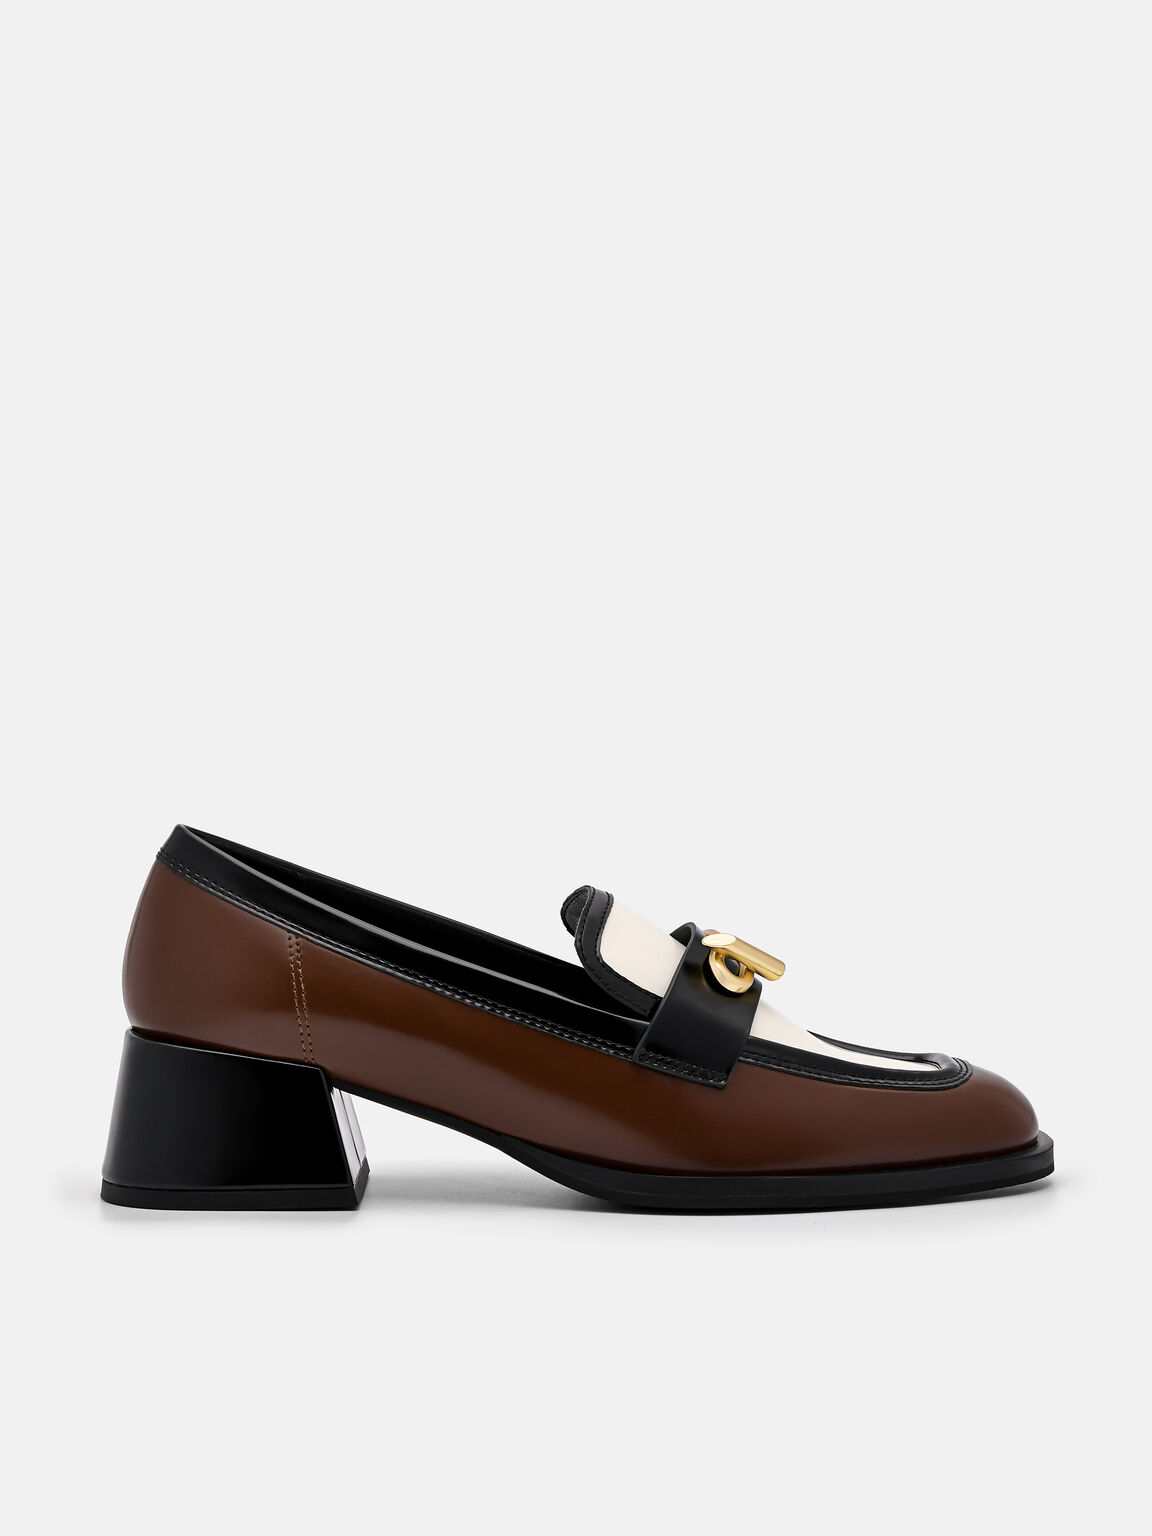 Brie Leather Heel Loafers, Multi